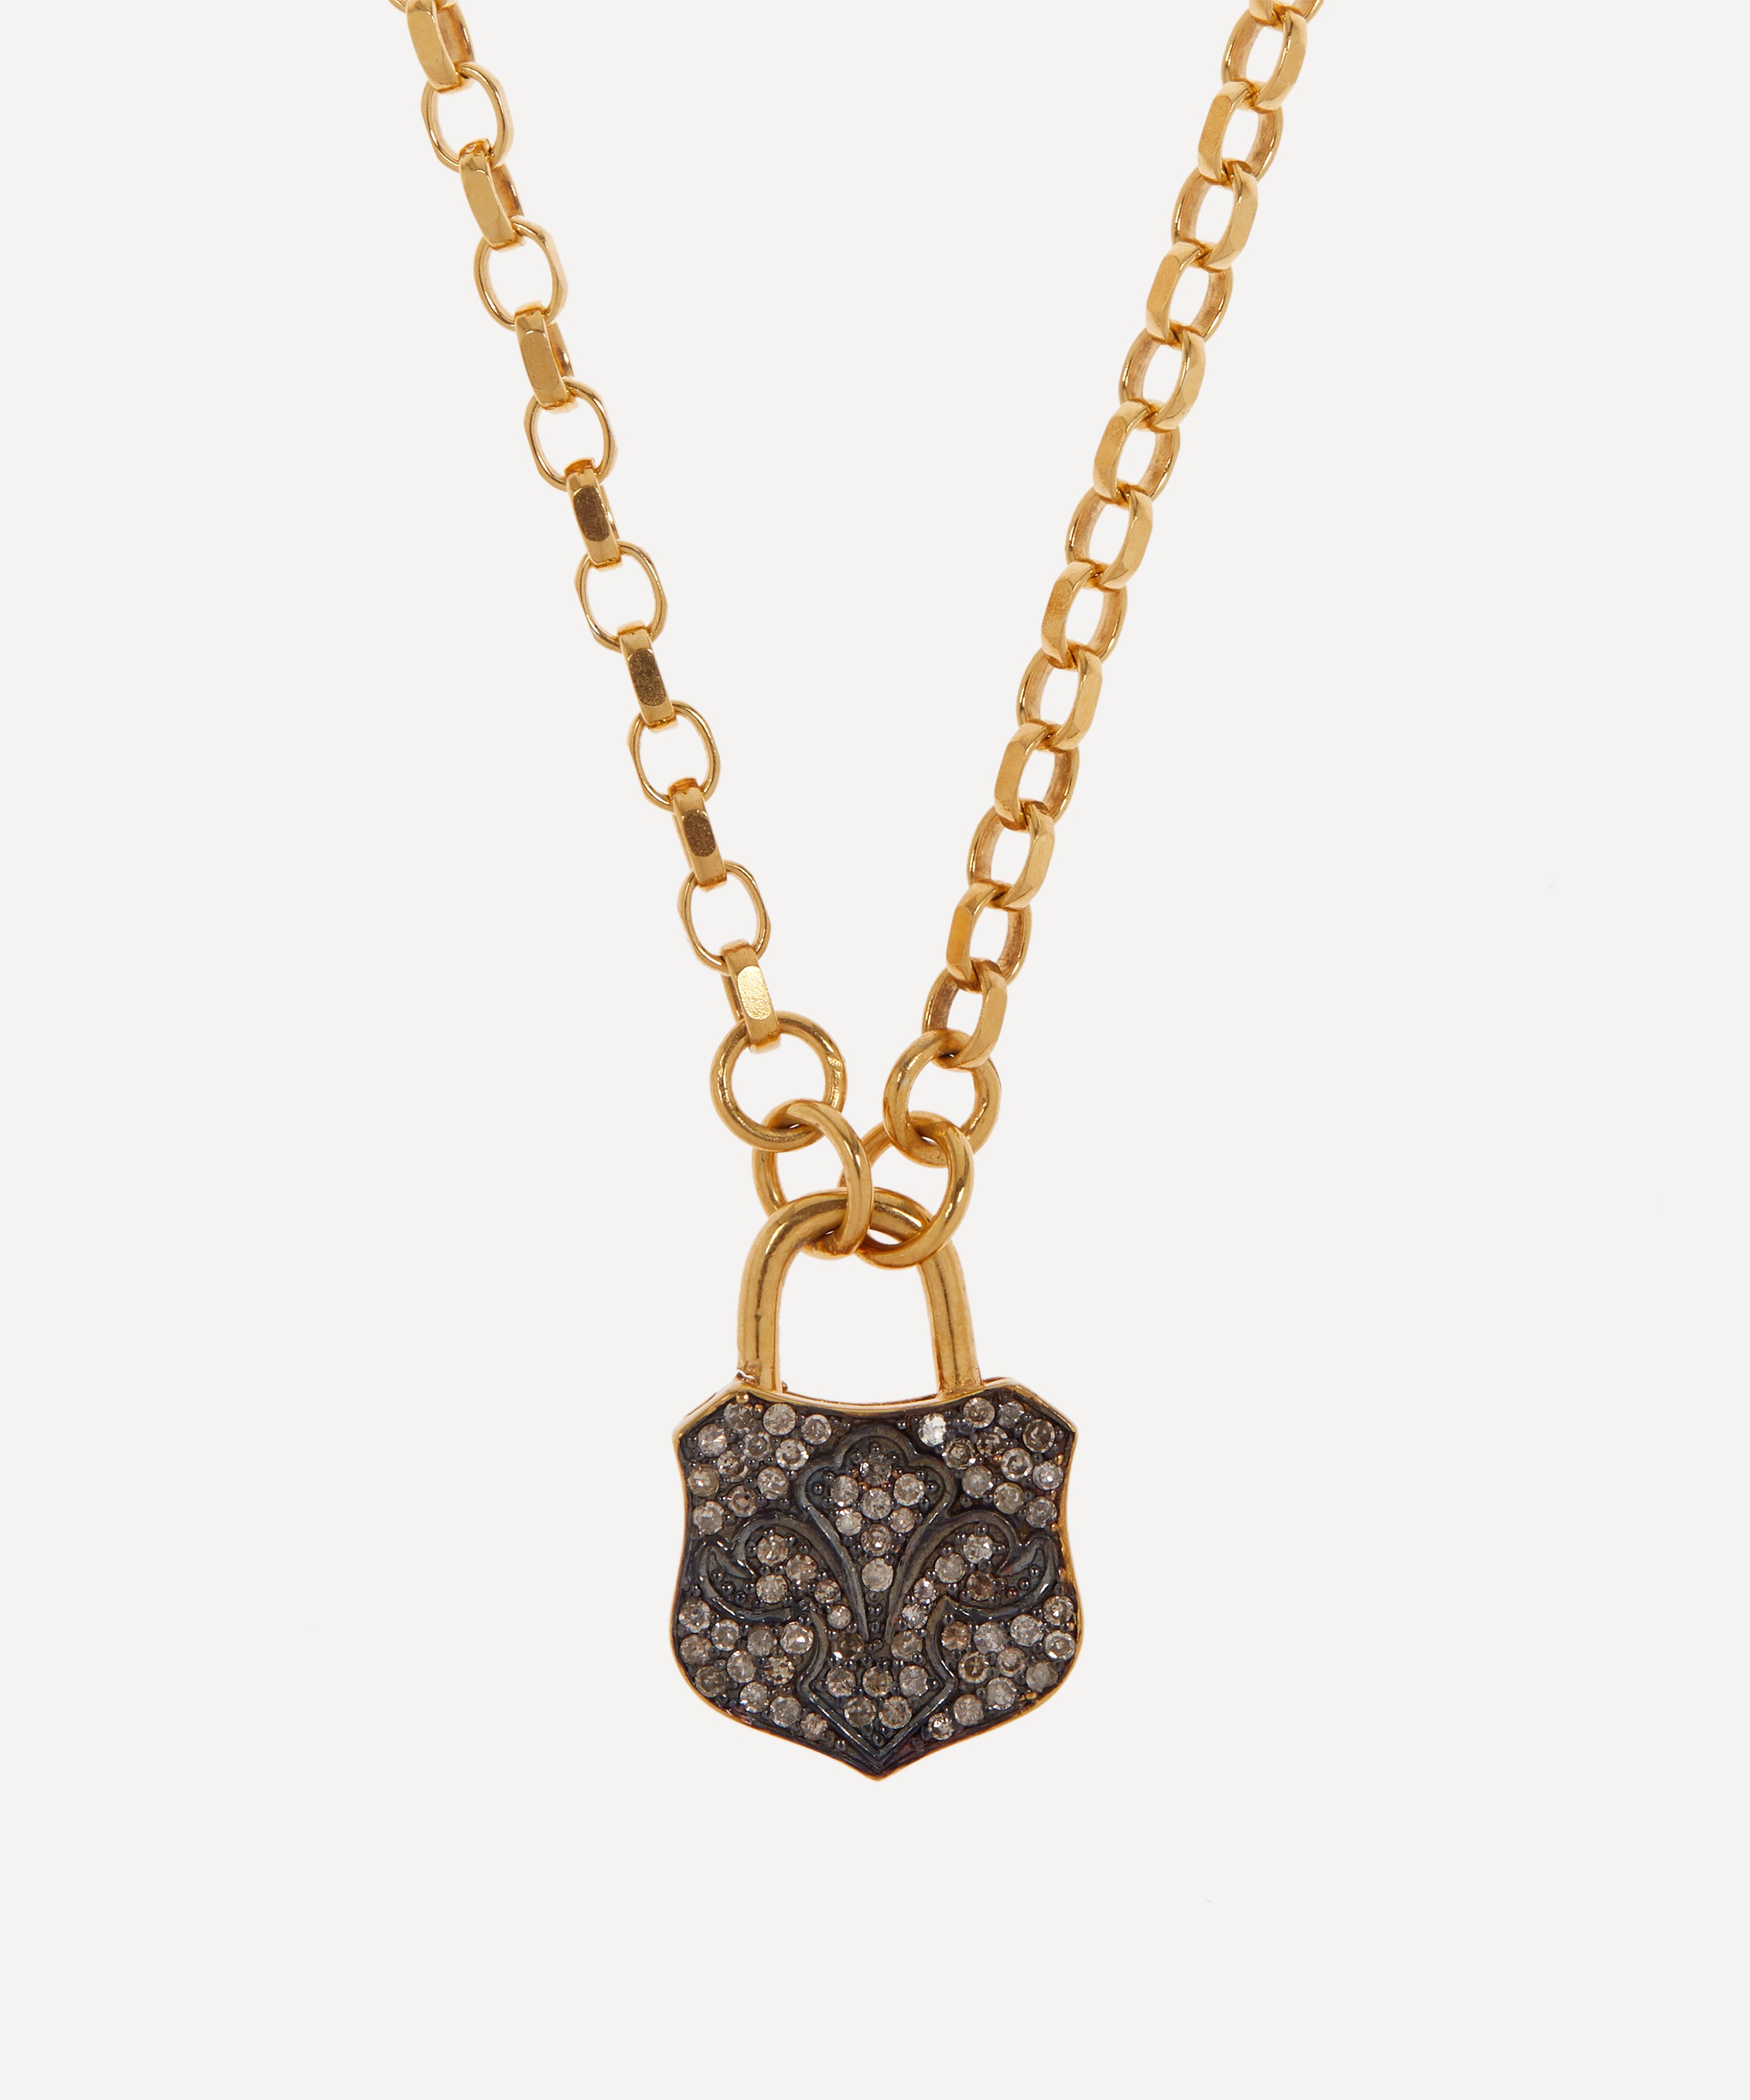 Kirstie Le Marque 9ct Gold-Plated Diamond Chunky Lock Pendant